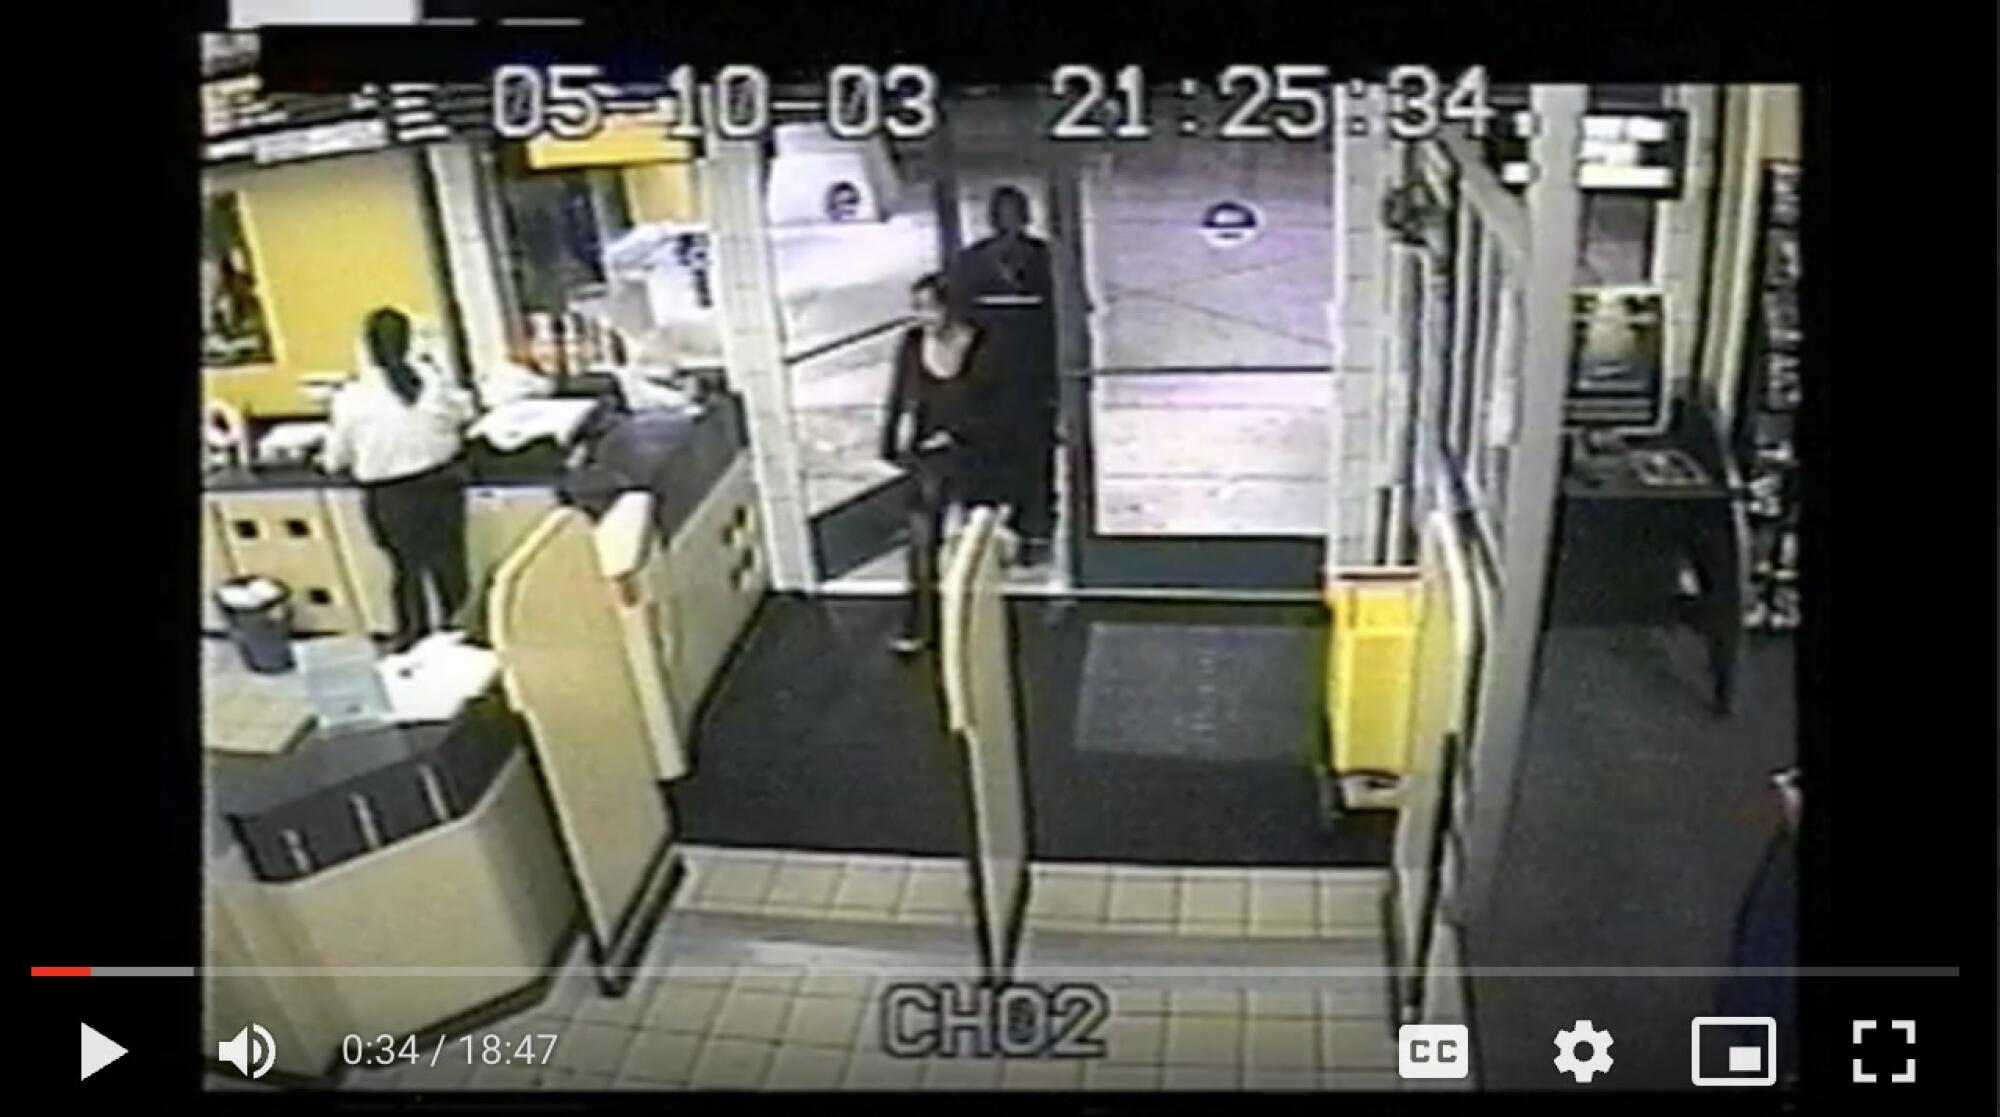 A frame of a surveillance video shows the inside of a store.